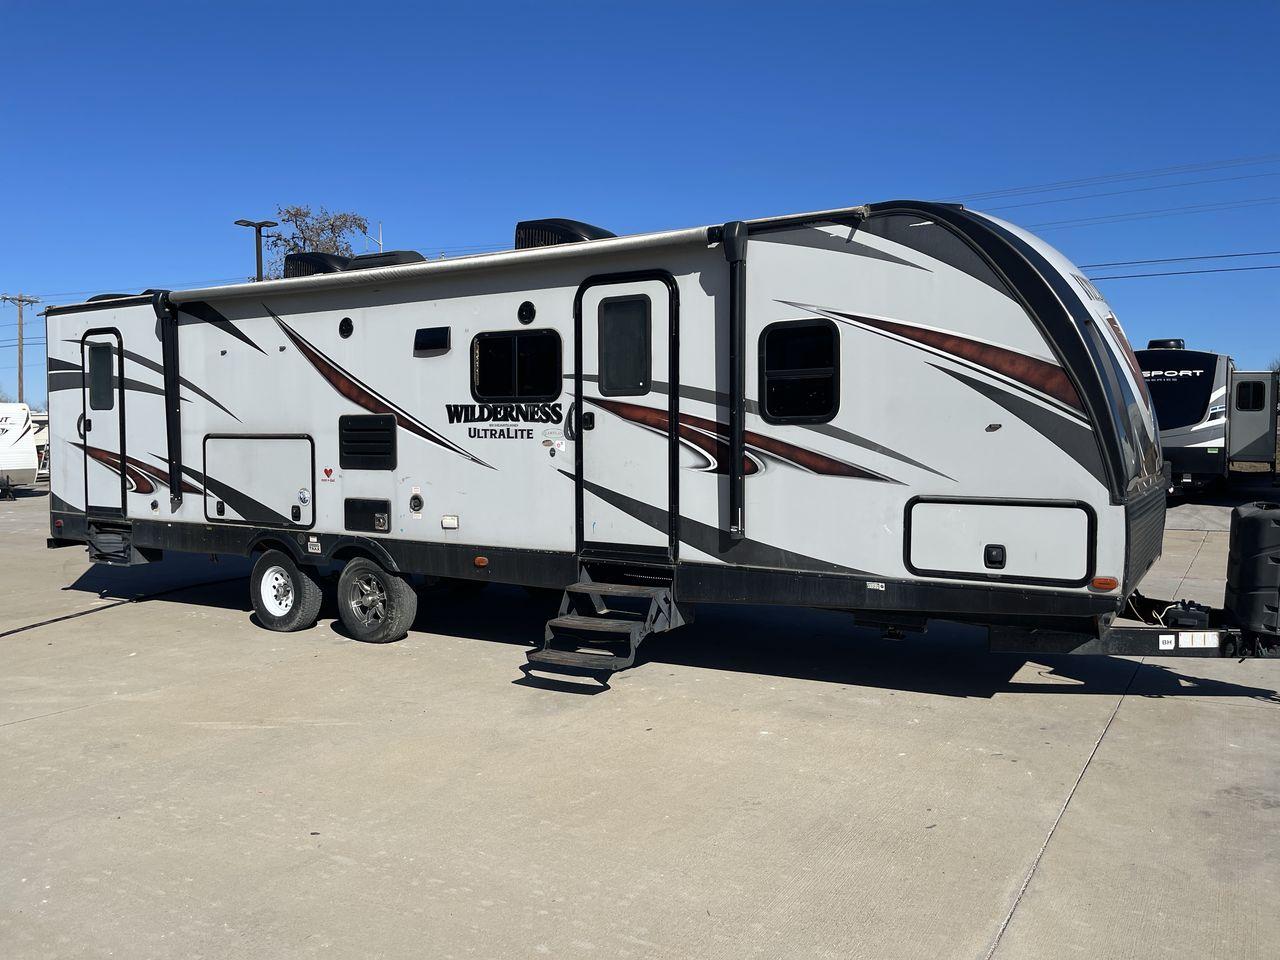 2018 GRAY HEARTLAND WILDERNESS USED 3125 (5SFNB3526JE) , Length: 35.75 ft. | Dry Weight: 6,840 lbs. | Gross Weight: 8,600 lbs. | Slides: 1 transmission, located at 4319 N Main St, Cleburne, TX, 76033, (817) 678-5133, 32.385960, -97.391212 - Discover your inner adventurer with the Heartland Wilderness 3125 travel trailer from 2018. This RV offers the ideal balance of roomy living, contemporary conveniences, and tough sturdiness for your outdoor adventures. It is designed for individuals who desire both comfort and exploration. The di - Photo #22